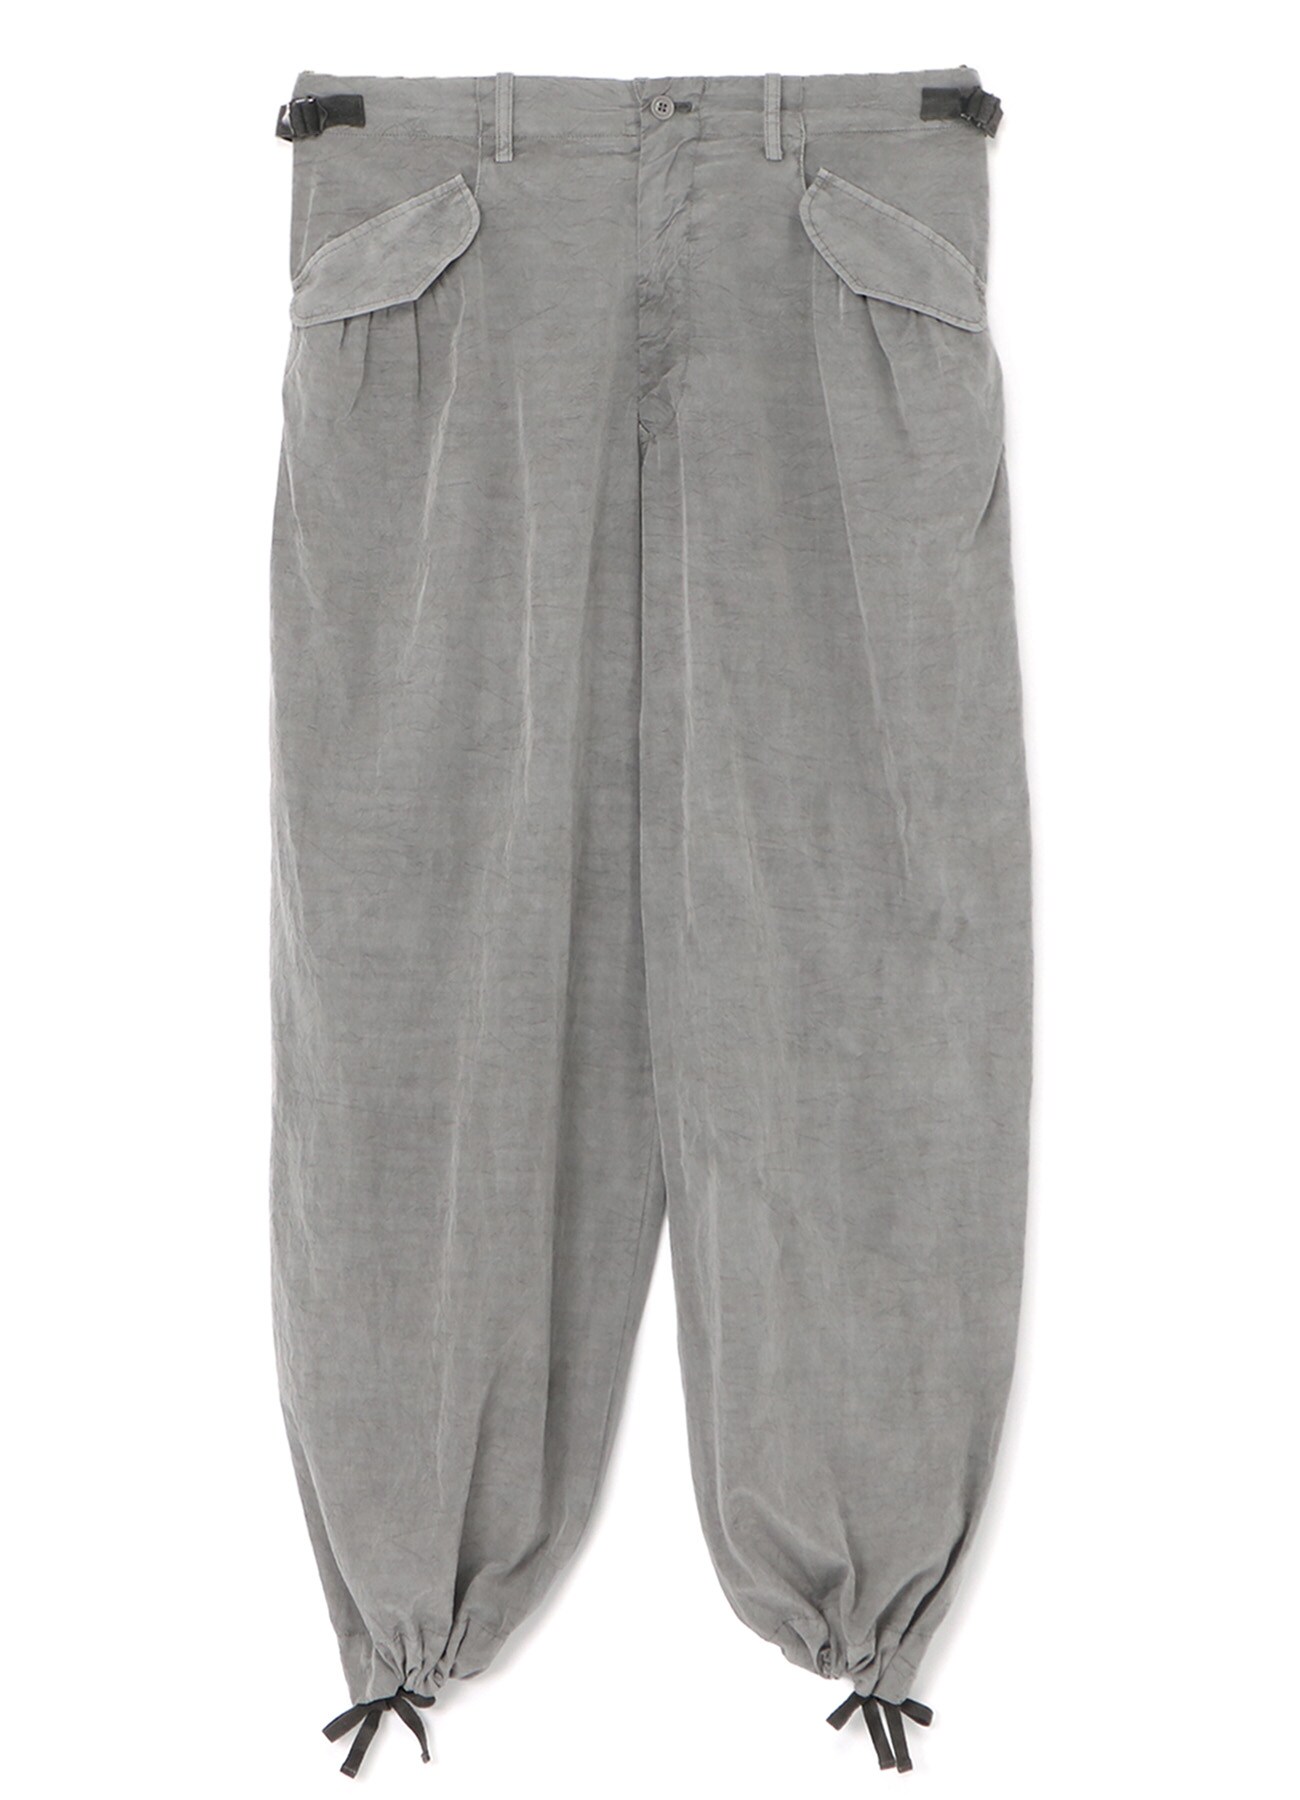 CUPRO/COTTON PIGMENT DYED WRINKLED LAWN PANTS